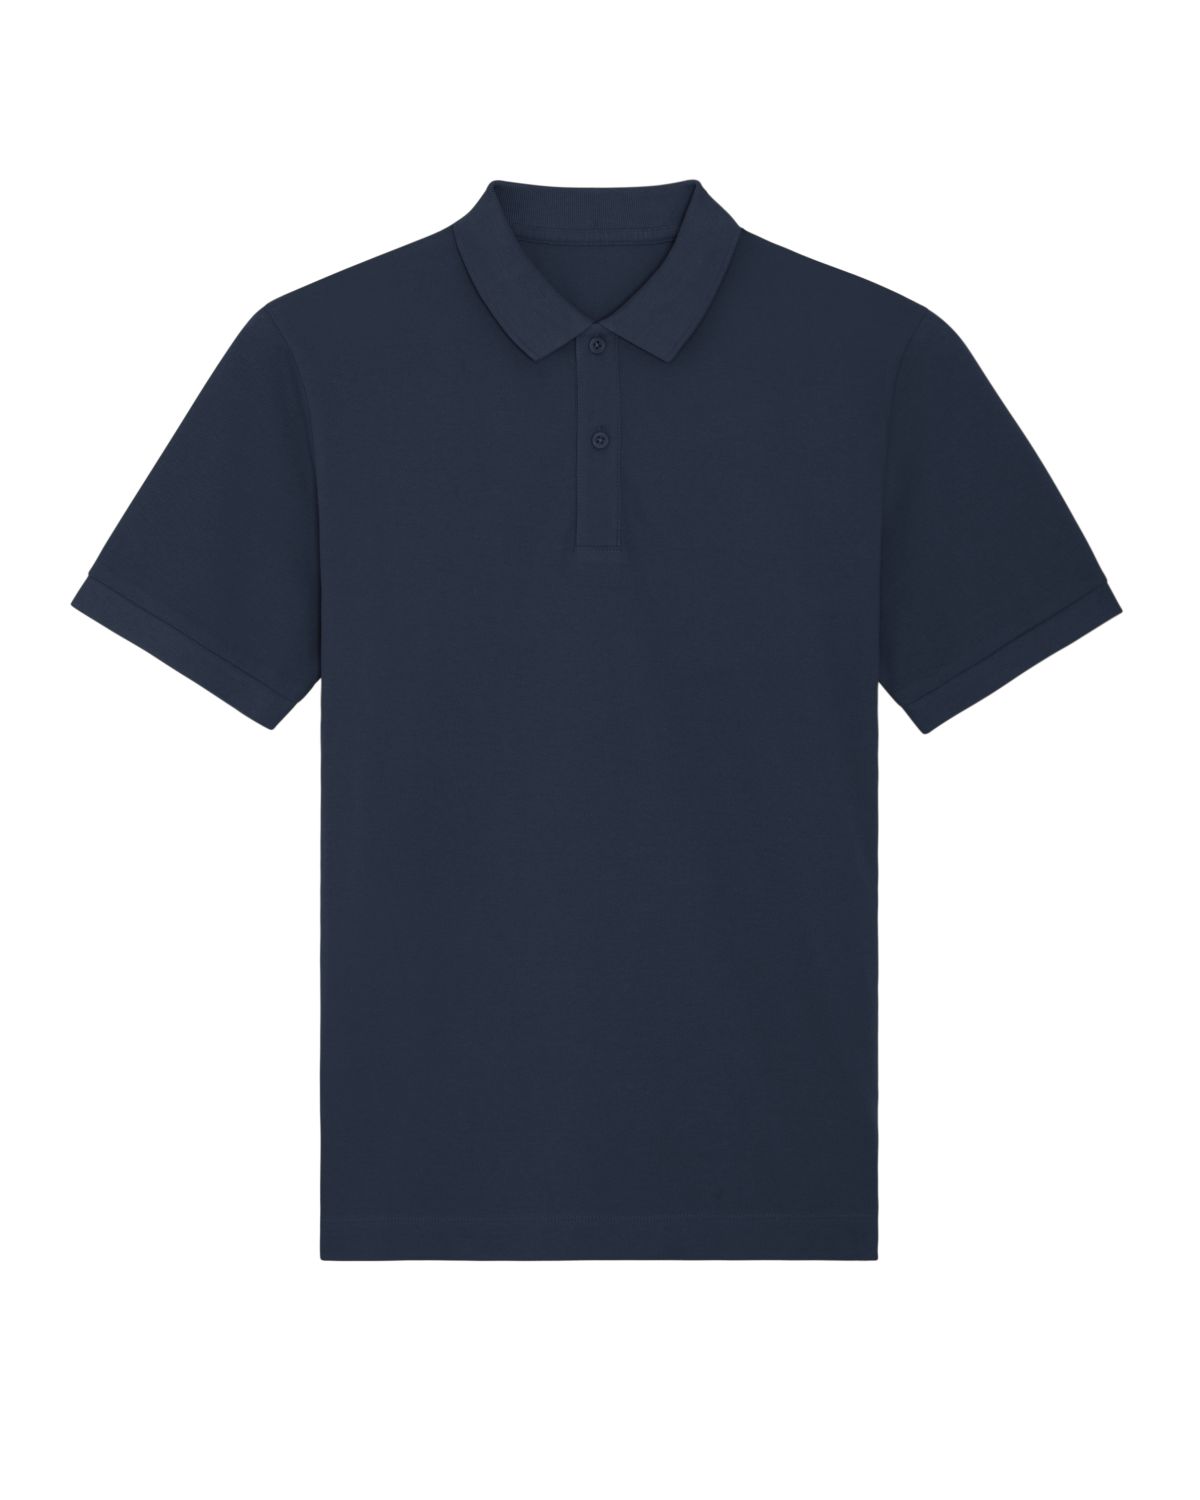 customize your own polo shirt made of 100% GOTS-certified organic cotton